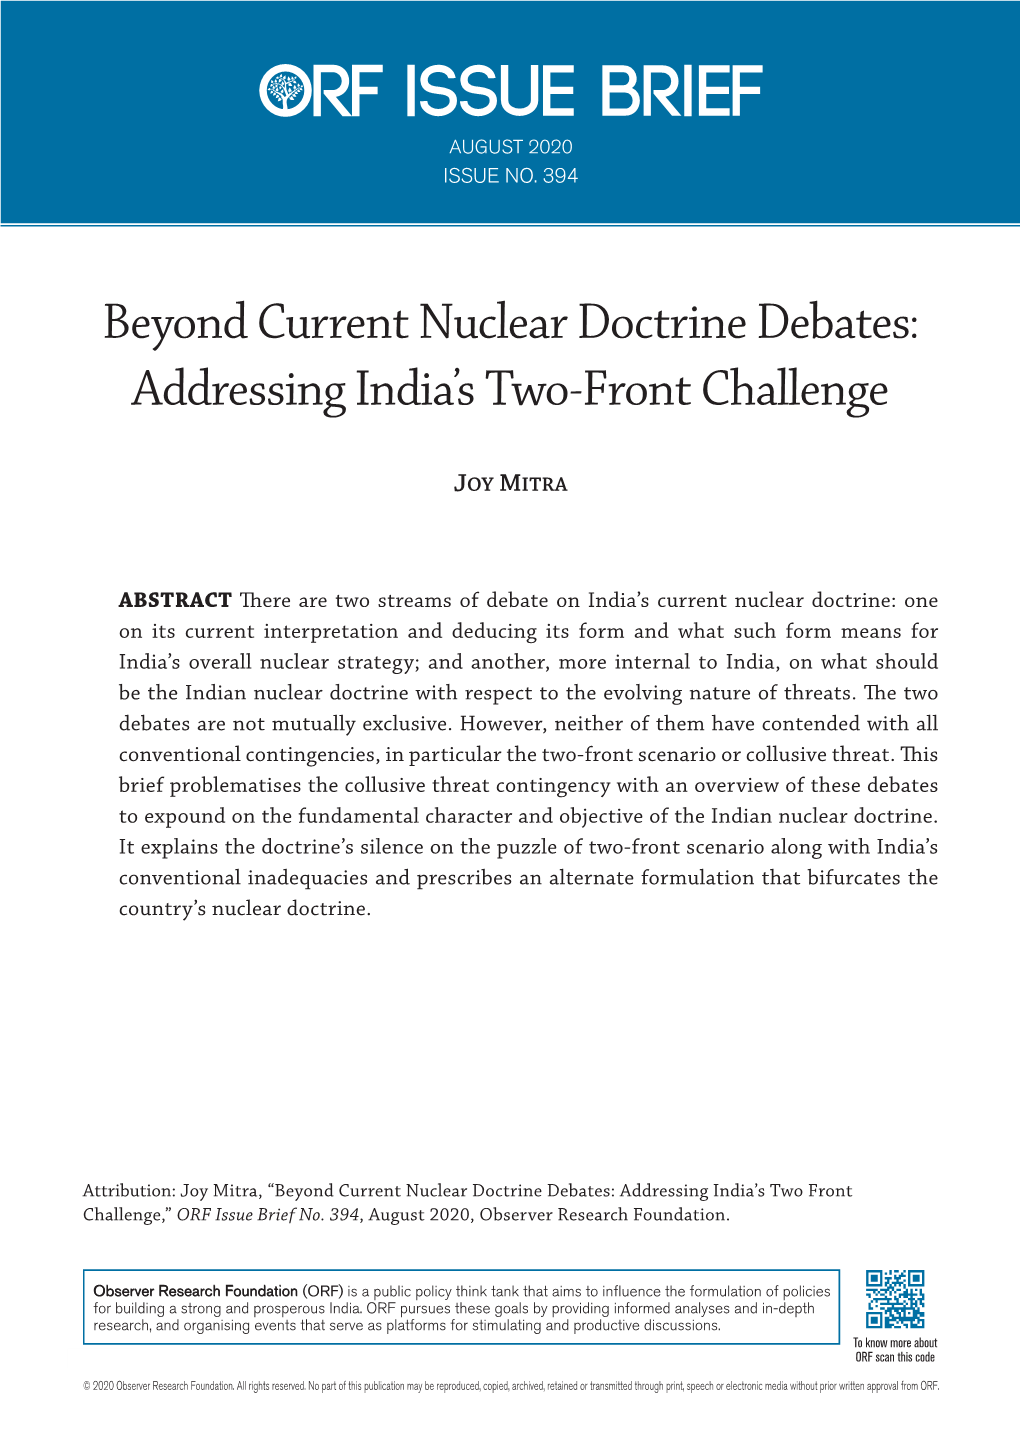 Beyond Current Nuclear Doctrine Debates: Addressing India’S Two-Front Challenge